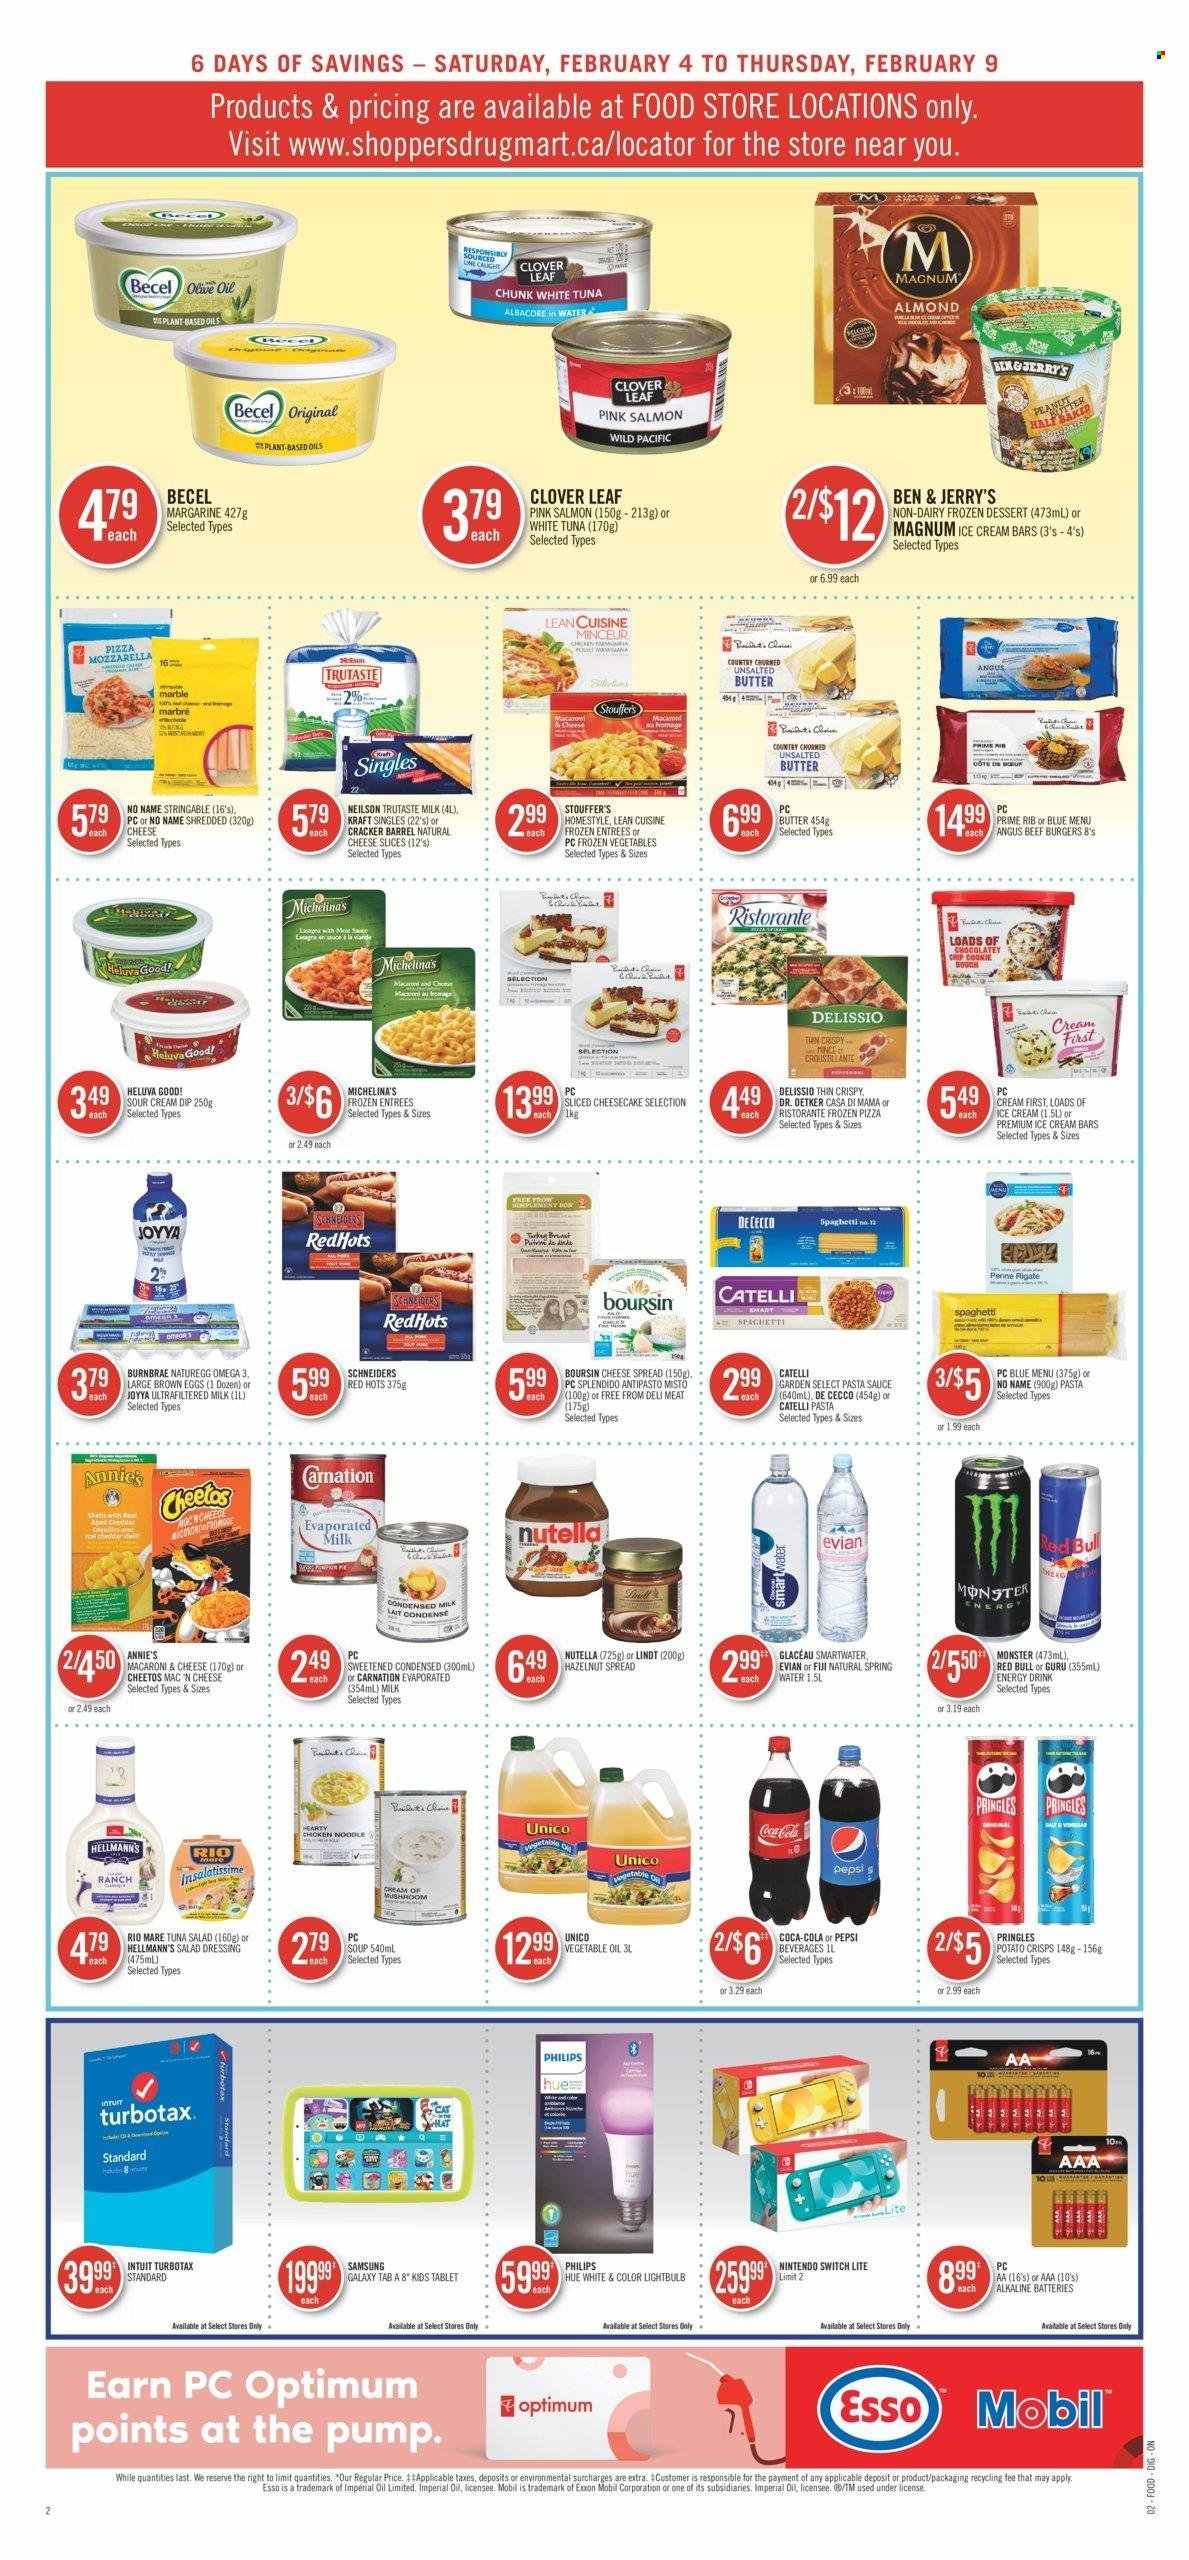 thumbnail - Shoppers Drug Mart Flyer - February 04, 2023 - February 09, 2023 - Sales products - Nintendo Switch, tablet, Samsung Galaxy, Samsung Galaxy Tab, Philips, salmon, tuna, No Name, macaroni & cheese, spaghetti, pizza, pasta sauce, soup, hamburger, sauce, noodles, beef burger, Lean Cuisine, Annie's, Kraft®, sandwich slices, sliced cheese, Dr. Oetker, Kraft Singles, Clover, evaporated milk, condensed milk, eggs, margarine, sour cream, dip, Hellmann’s, Magnum, ice cream, ice cream bars, Ben & Jerry's, Stouffer's, crackers, potato crisps, Pringles, Cheetos, tuna salad, penne, salad dressing, dressing, vegetable oil, olive oil, hazelnut spread, Coca-Cola, Pepsi, energy drink, Monster, Red Bull, Monster Energy, spring water, Smartwater, Evian, battery, alkaline batteries, Optimum, Samsung, Omega-3, Nutella, Lindt. Page 3.